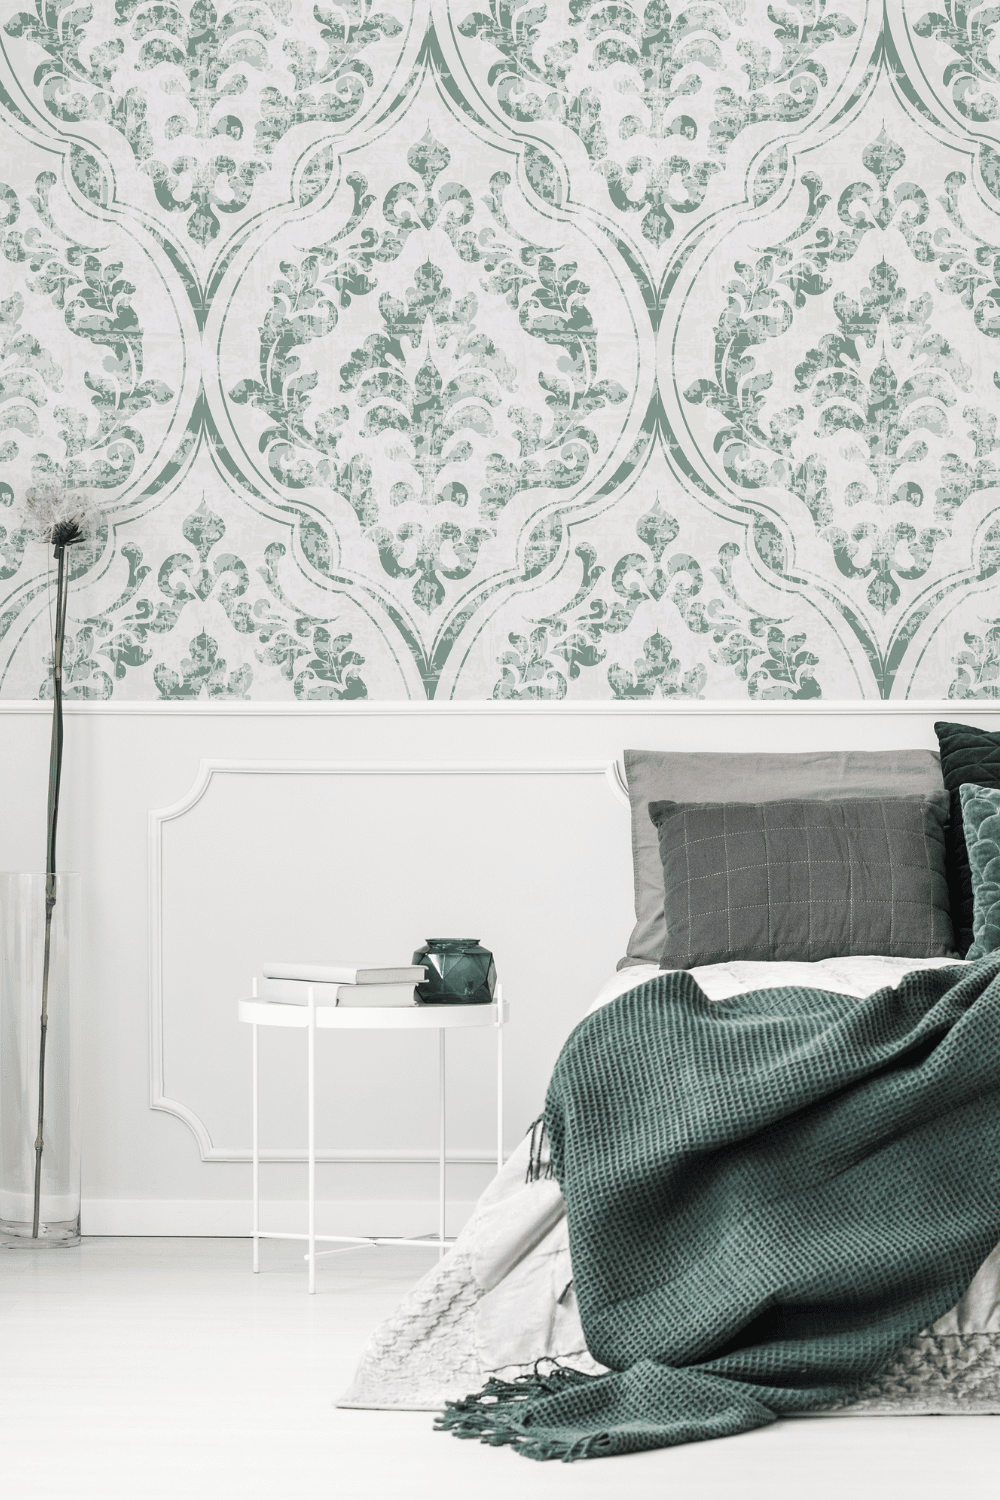 How to Transform Your Home With a Small Amount of Wallpaper  Sian Zeng